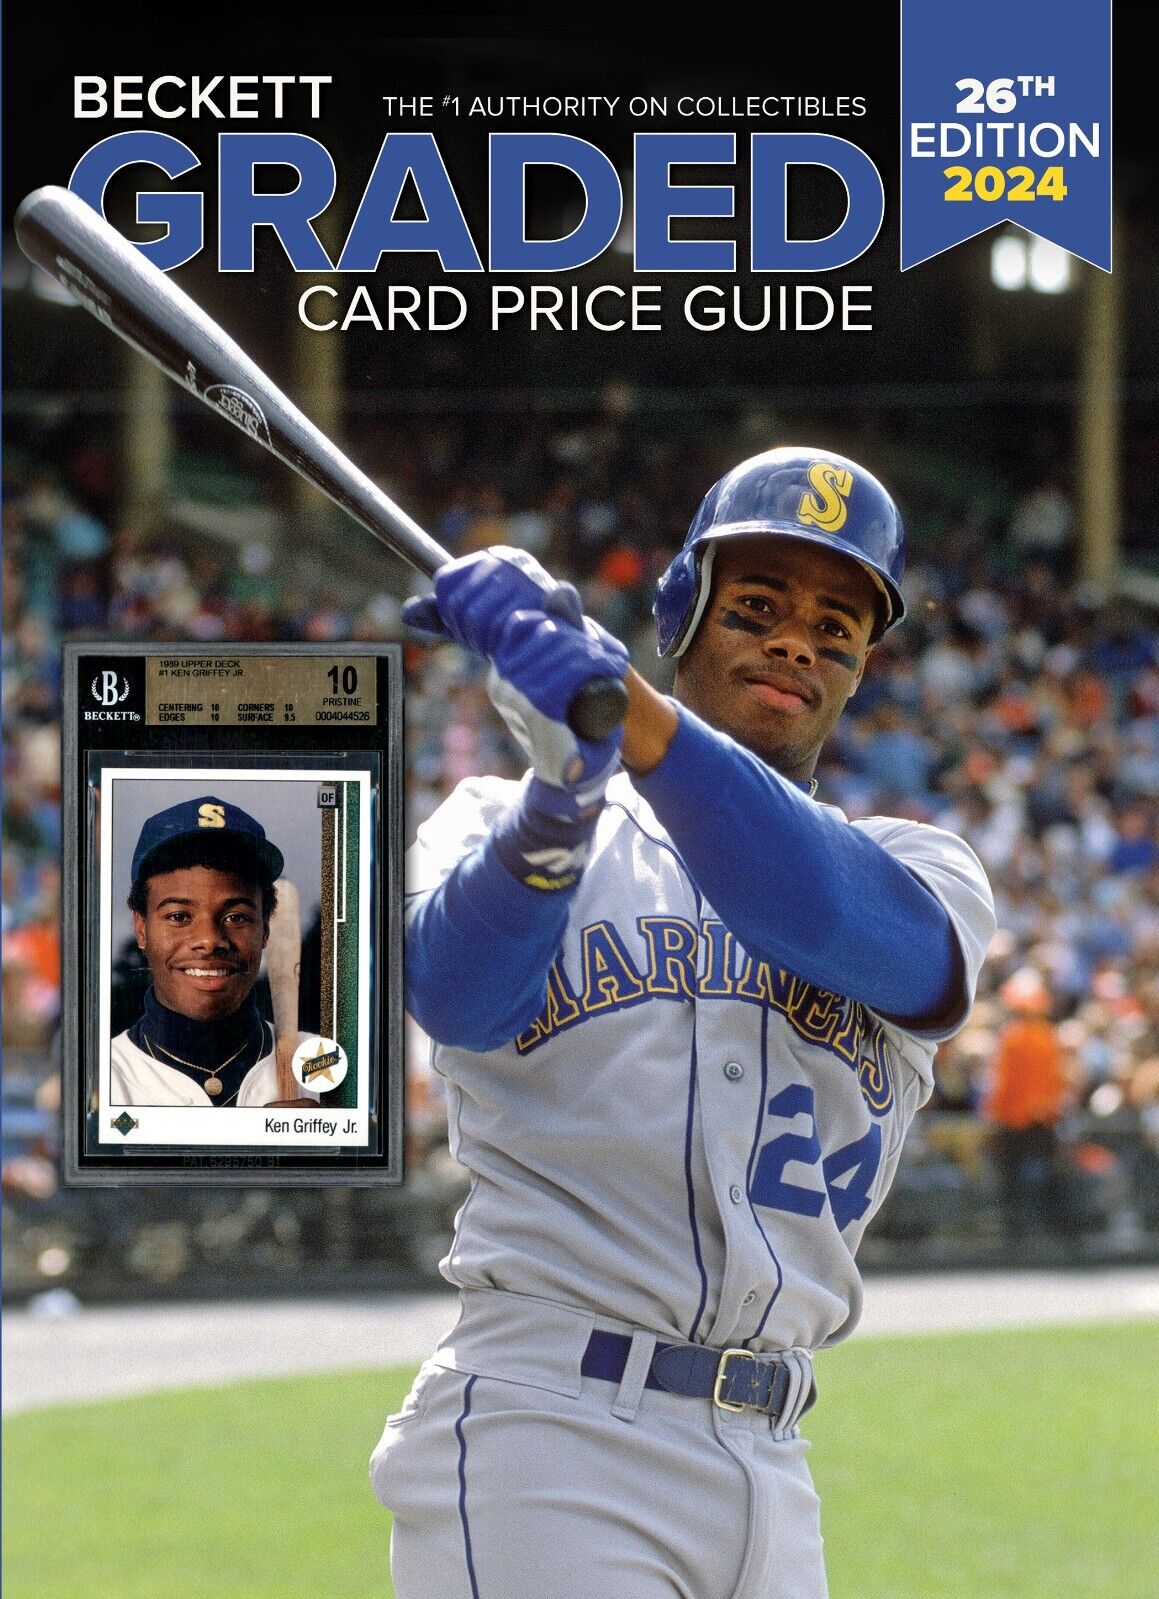 New 2024 Beckett GRADED CARD Price Guide 26th Edition with KEN GRIFFEY JR